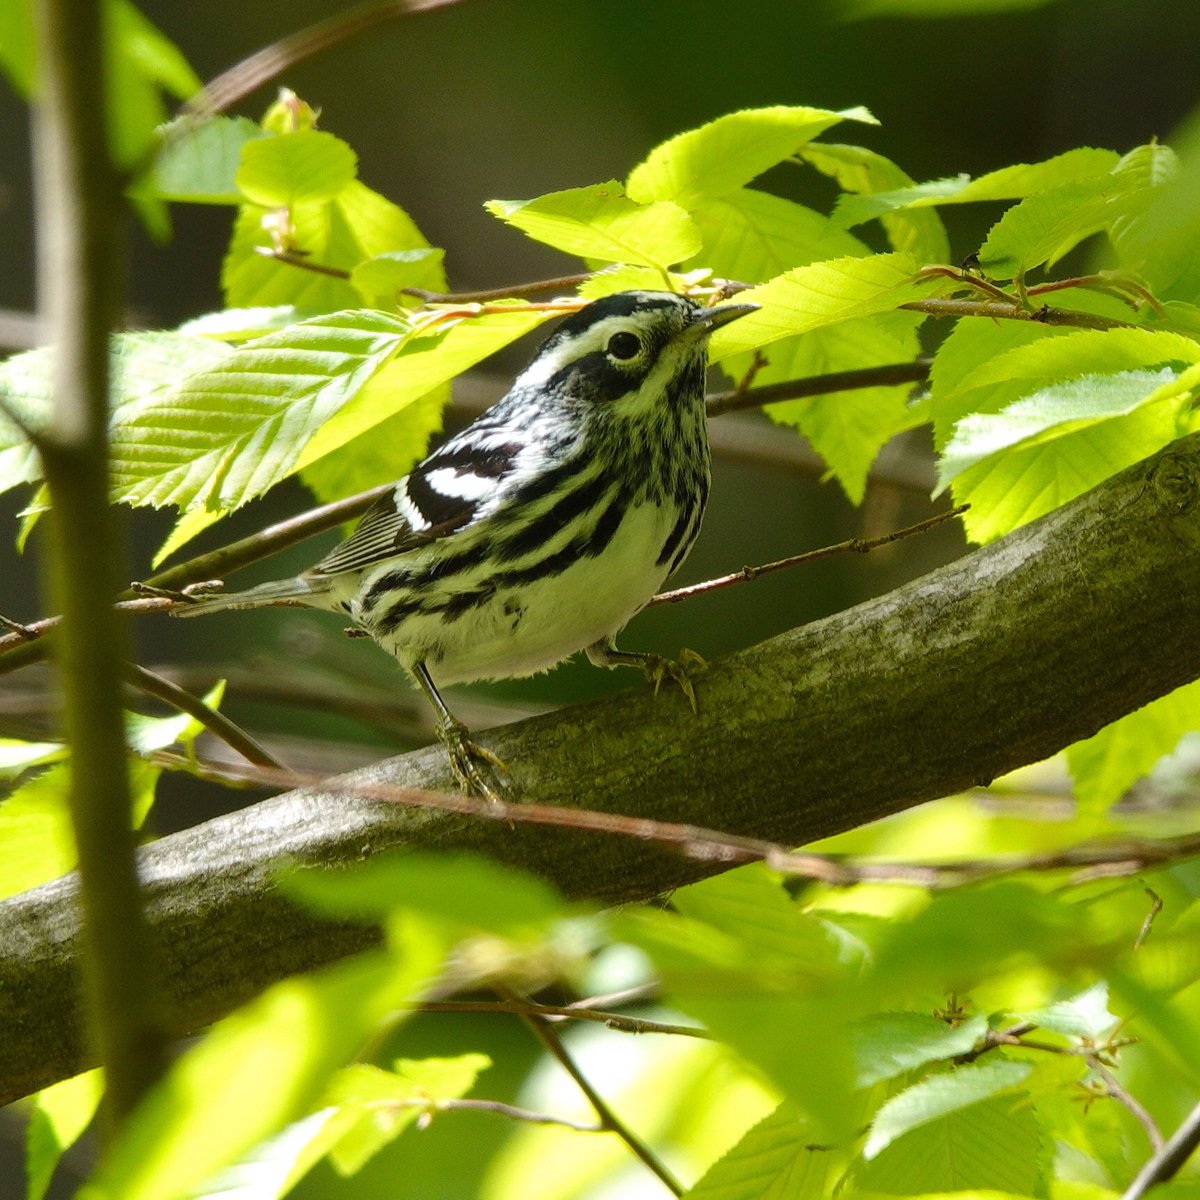 Lovely Black and White Warbler stopping by for a drink at Tanner’s Spring. #blackandwhitewarbler #warblers #birding #springmigration  #birdphotography #songbirds #birdcp #birdcpp #birds #birdphotos